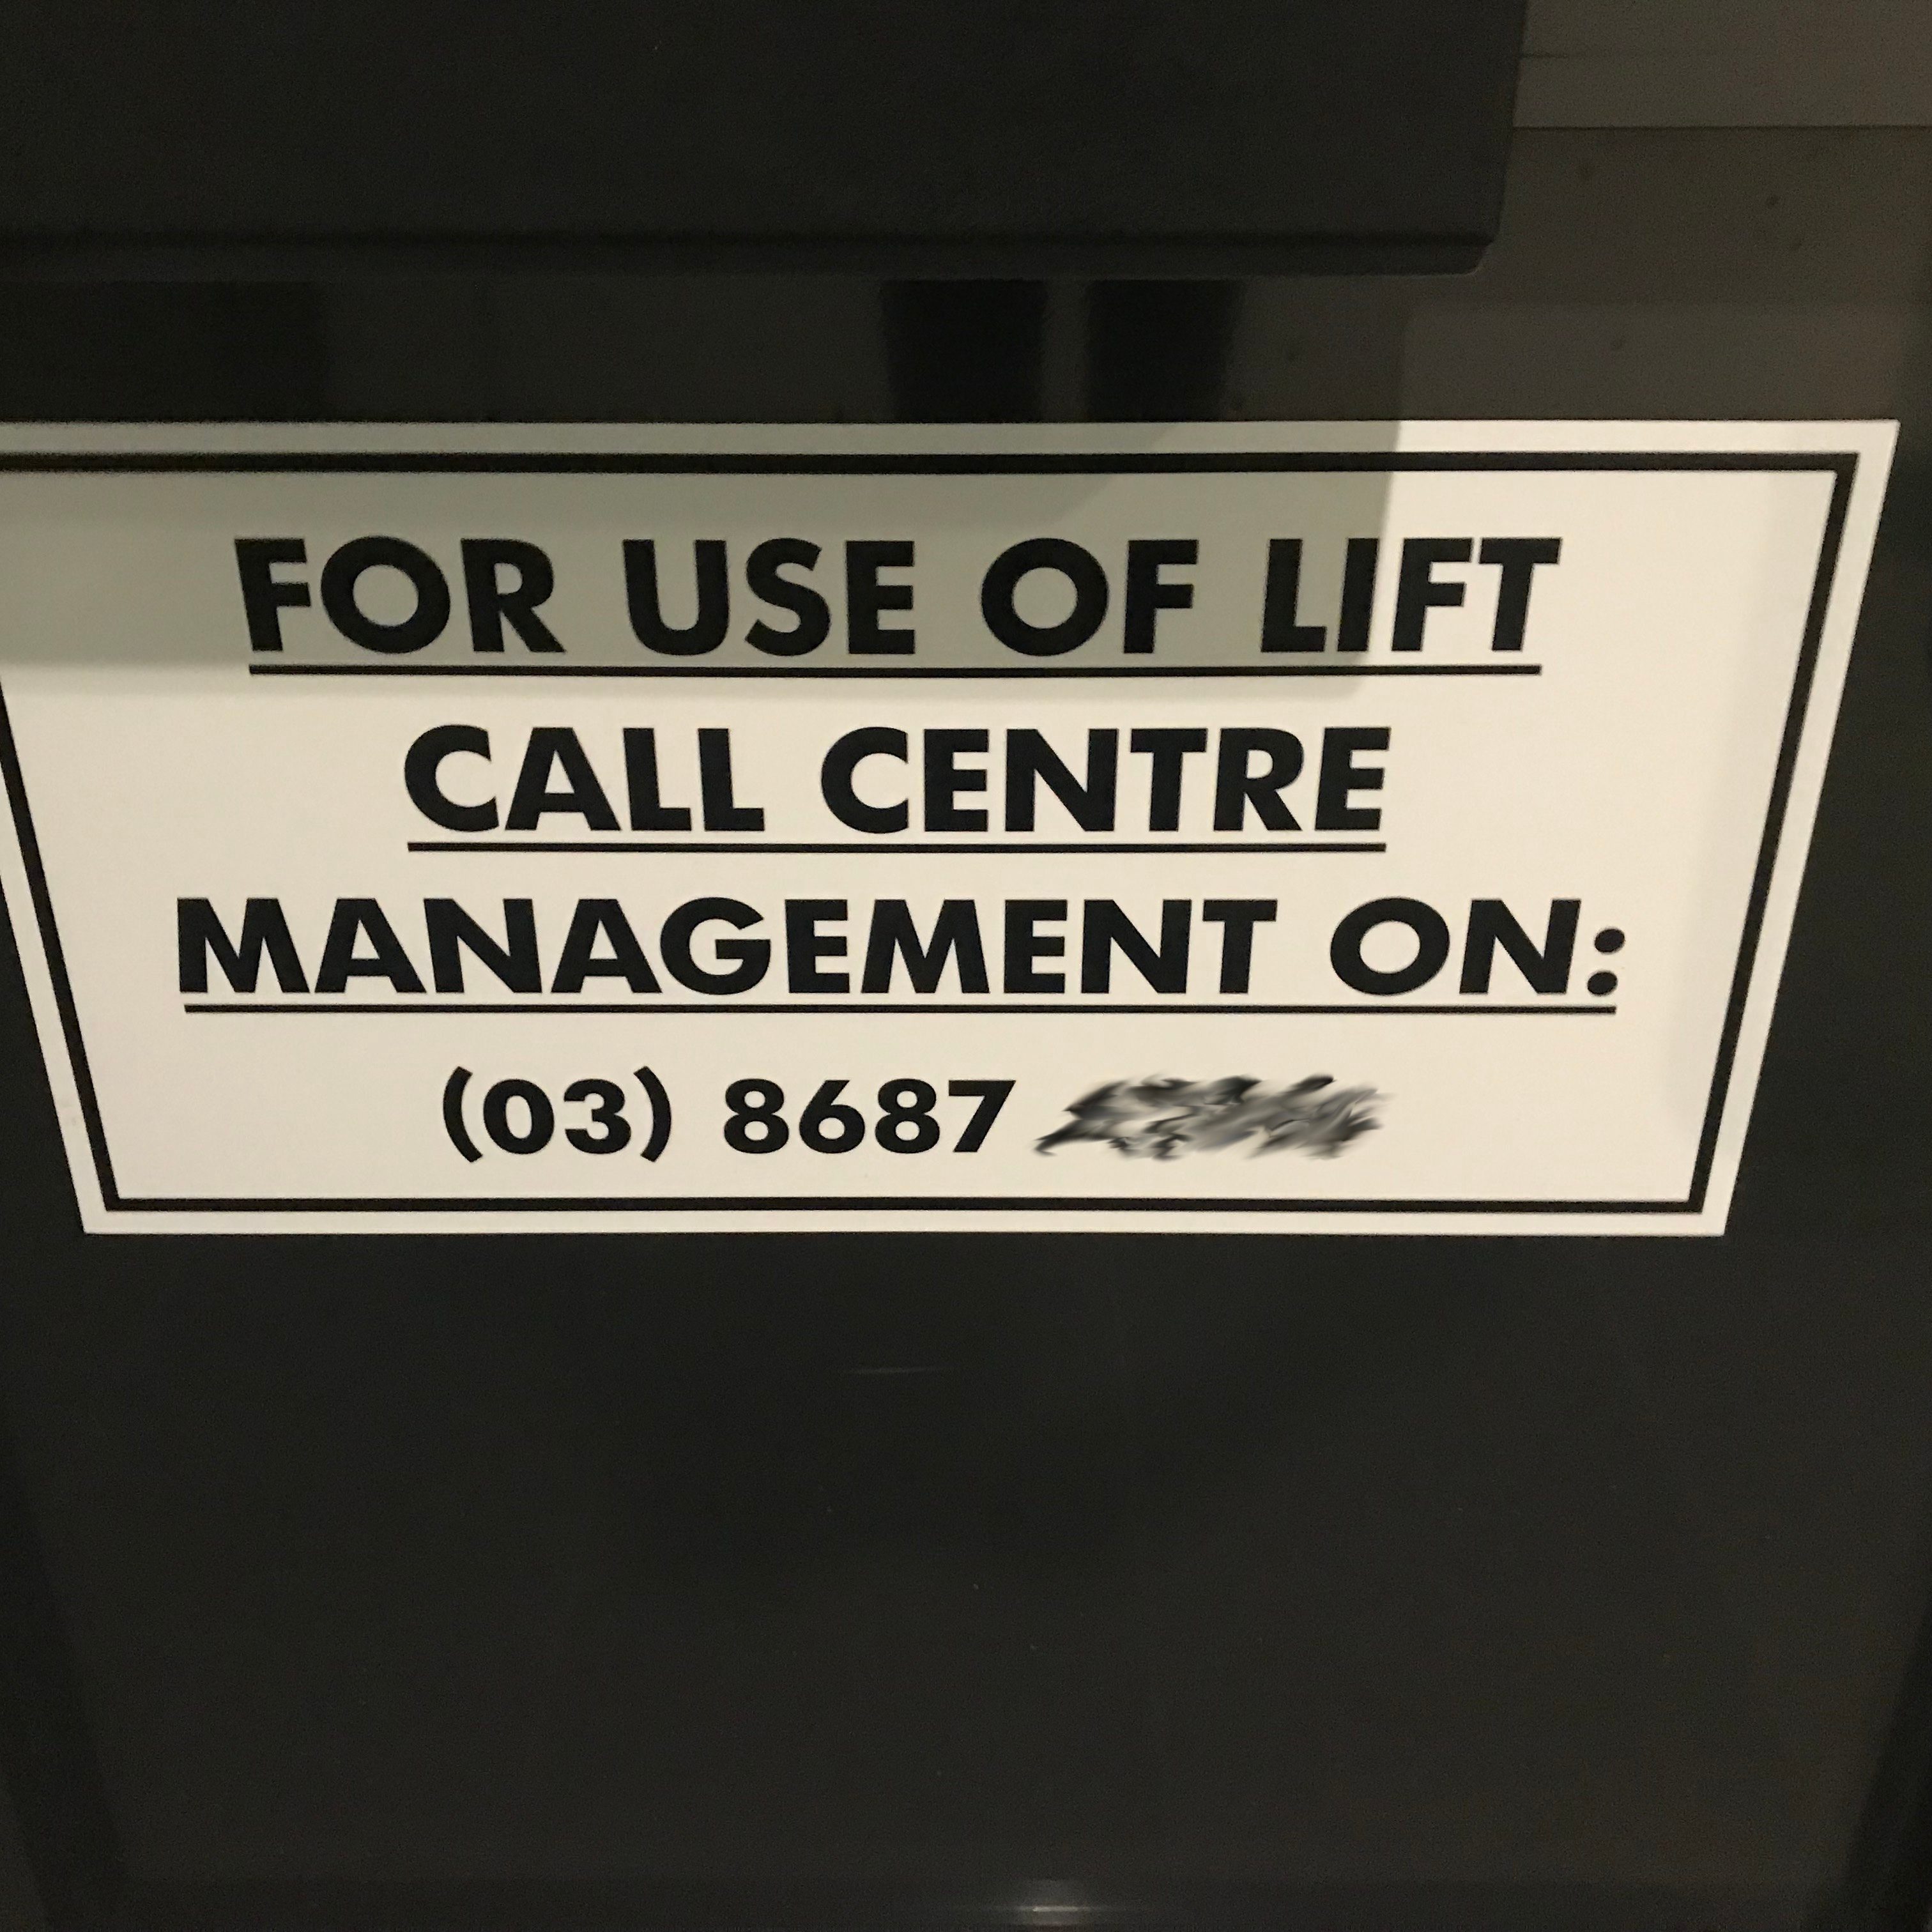 Sign: For use of lift call centre management on a blurred phone number.